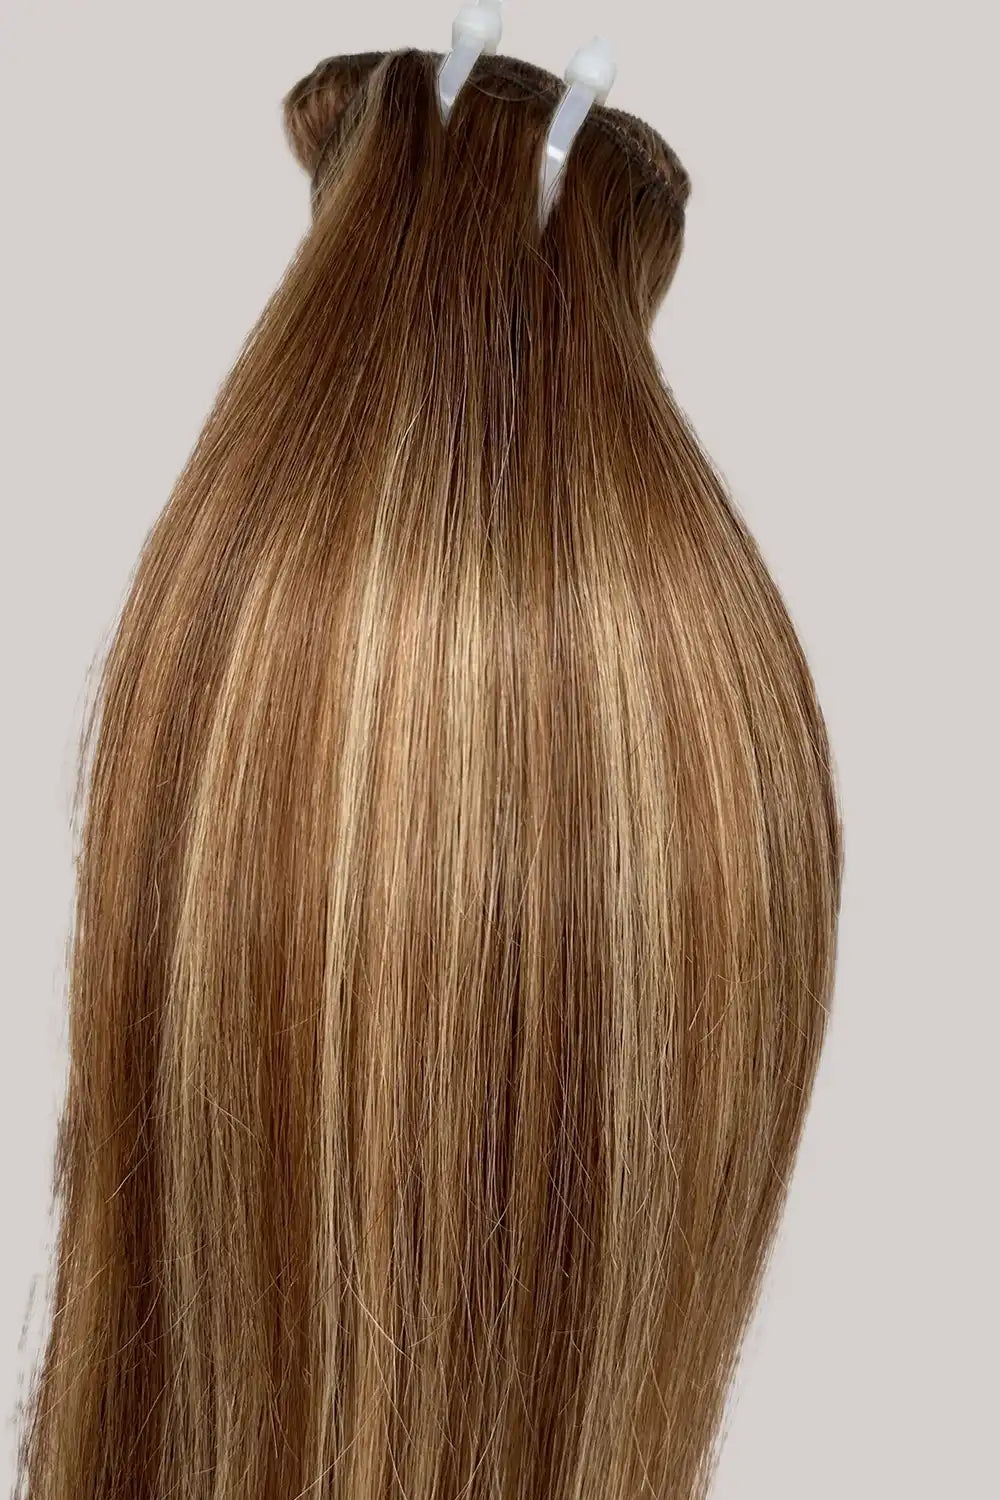 clip-in-human-hair-extensions-brown-with-blonde-highlights-2